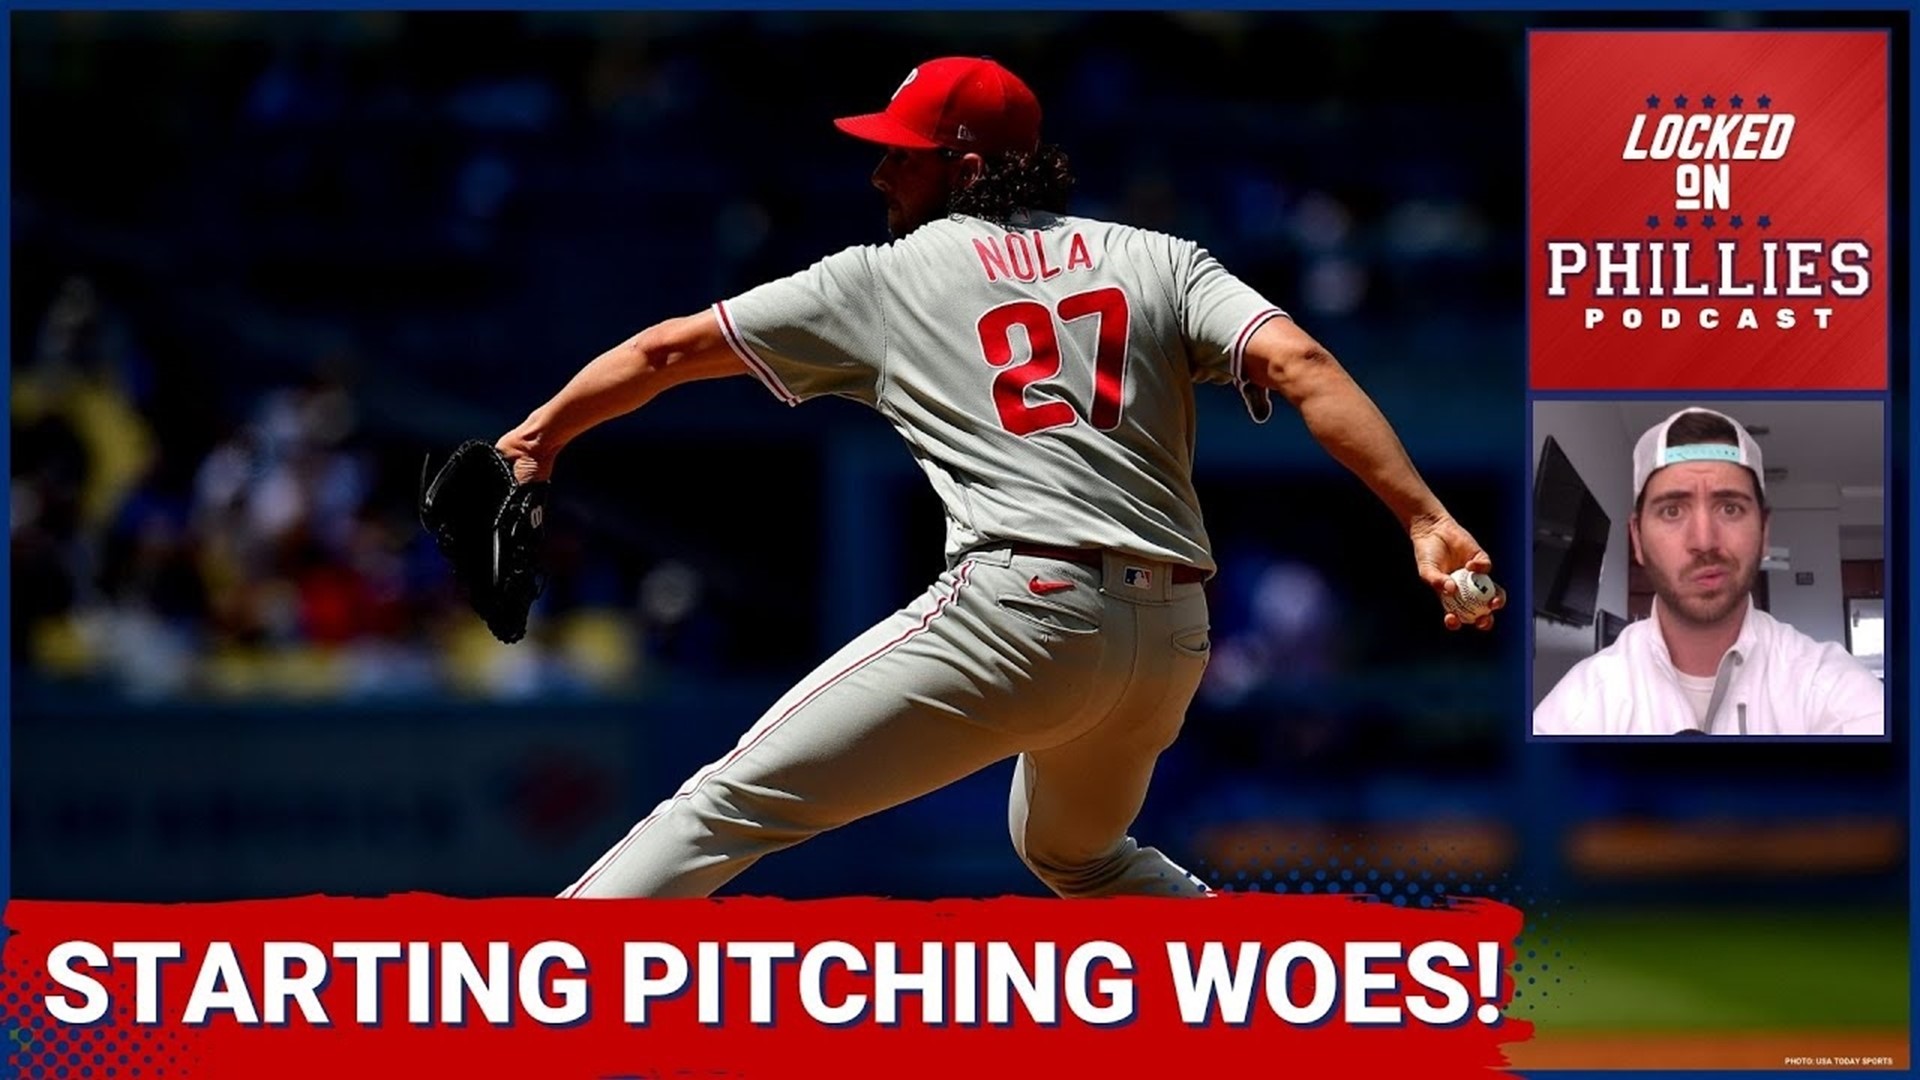 In today's episode, Connor reacts to the Philadelphia Phillies' awful series in LA vs. the Dodgers and the terrible starting pitching that cost them.